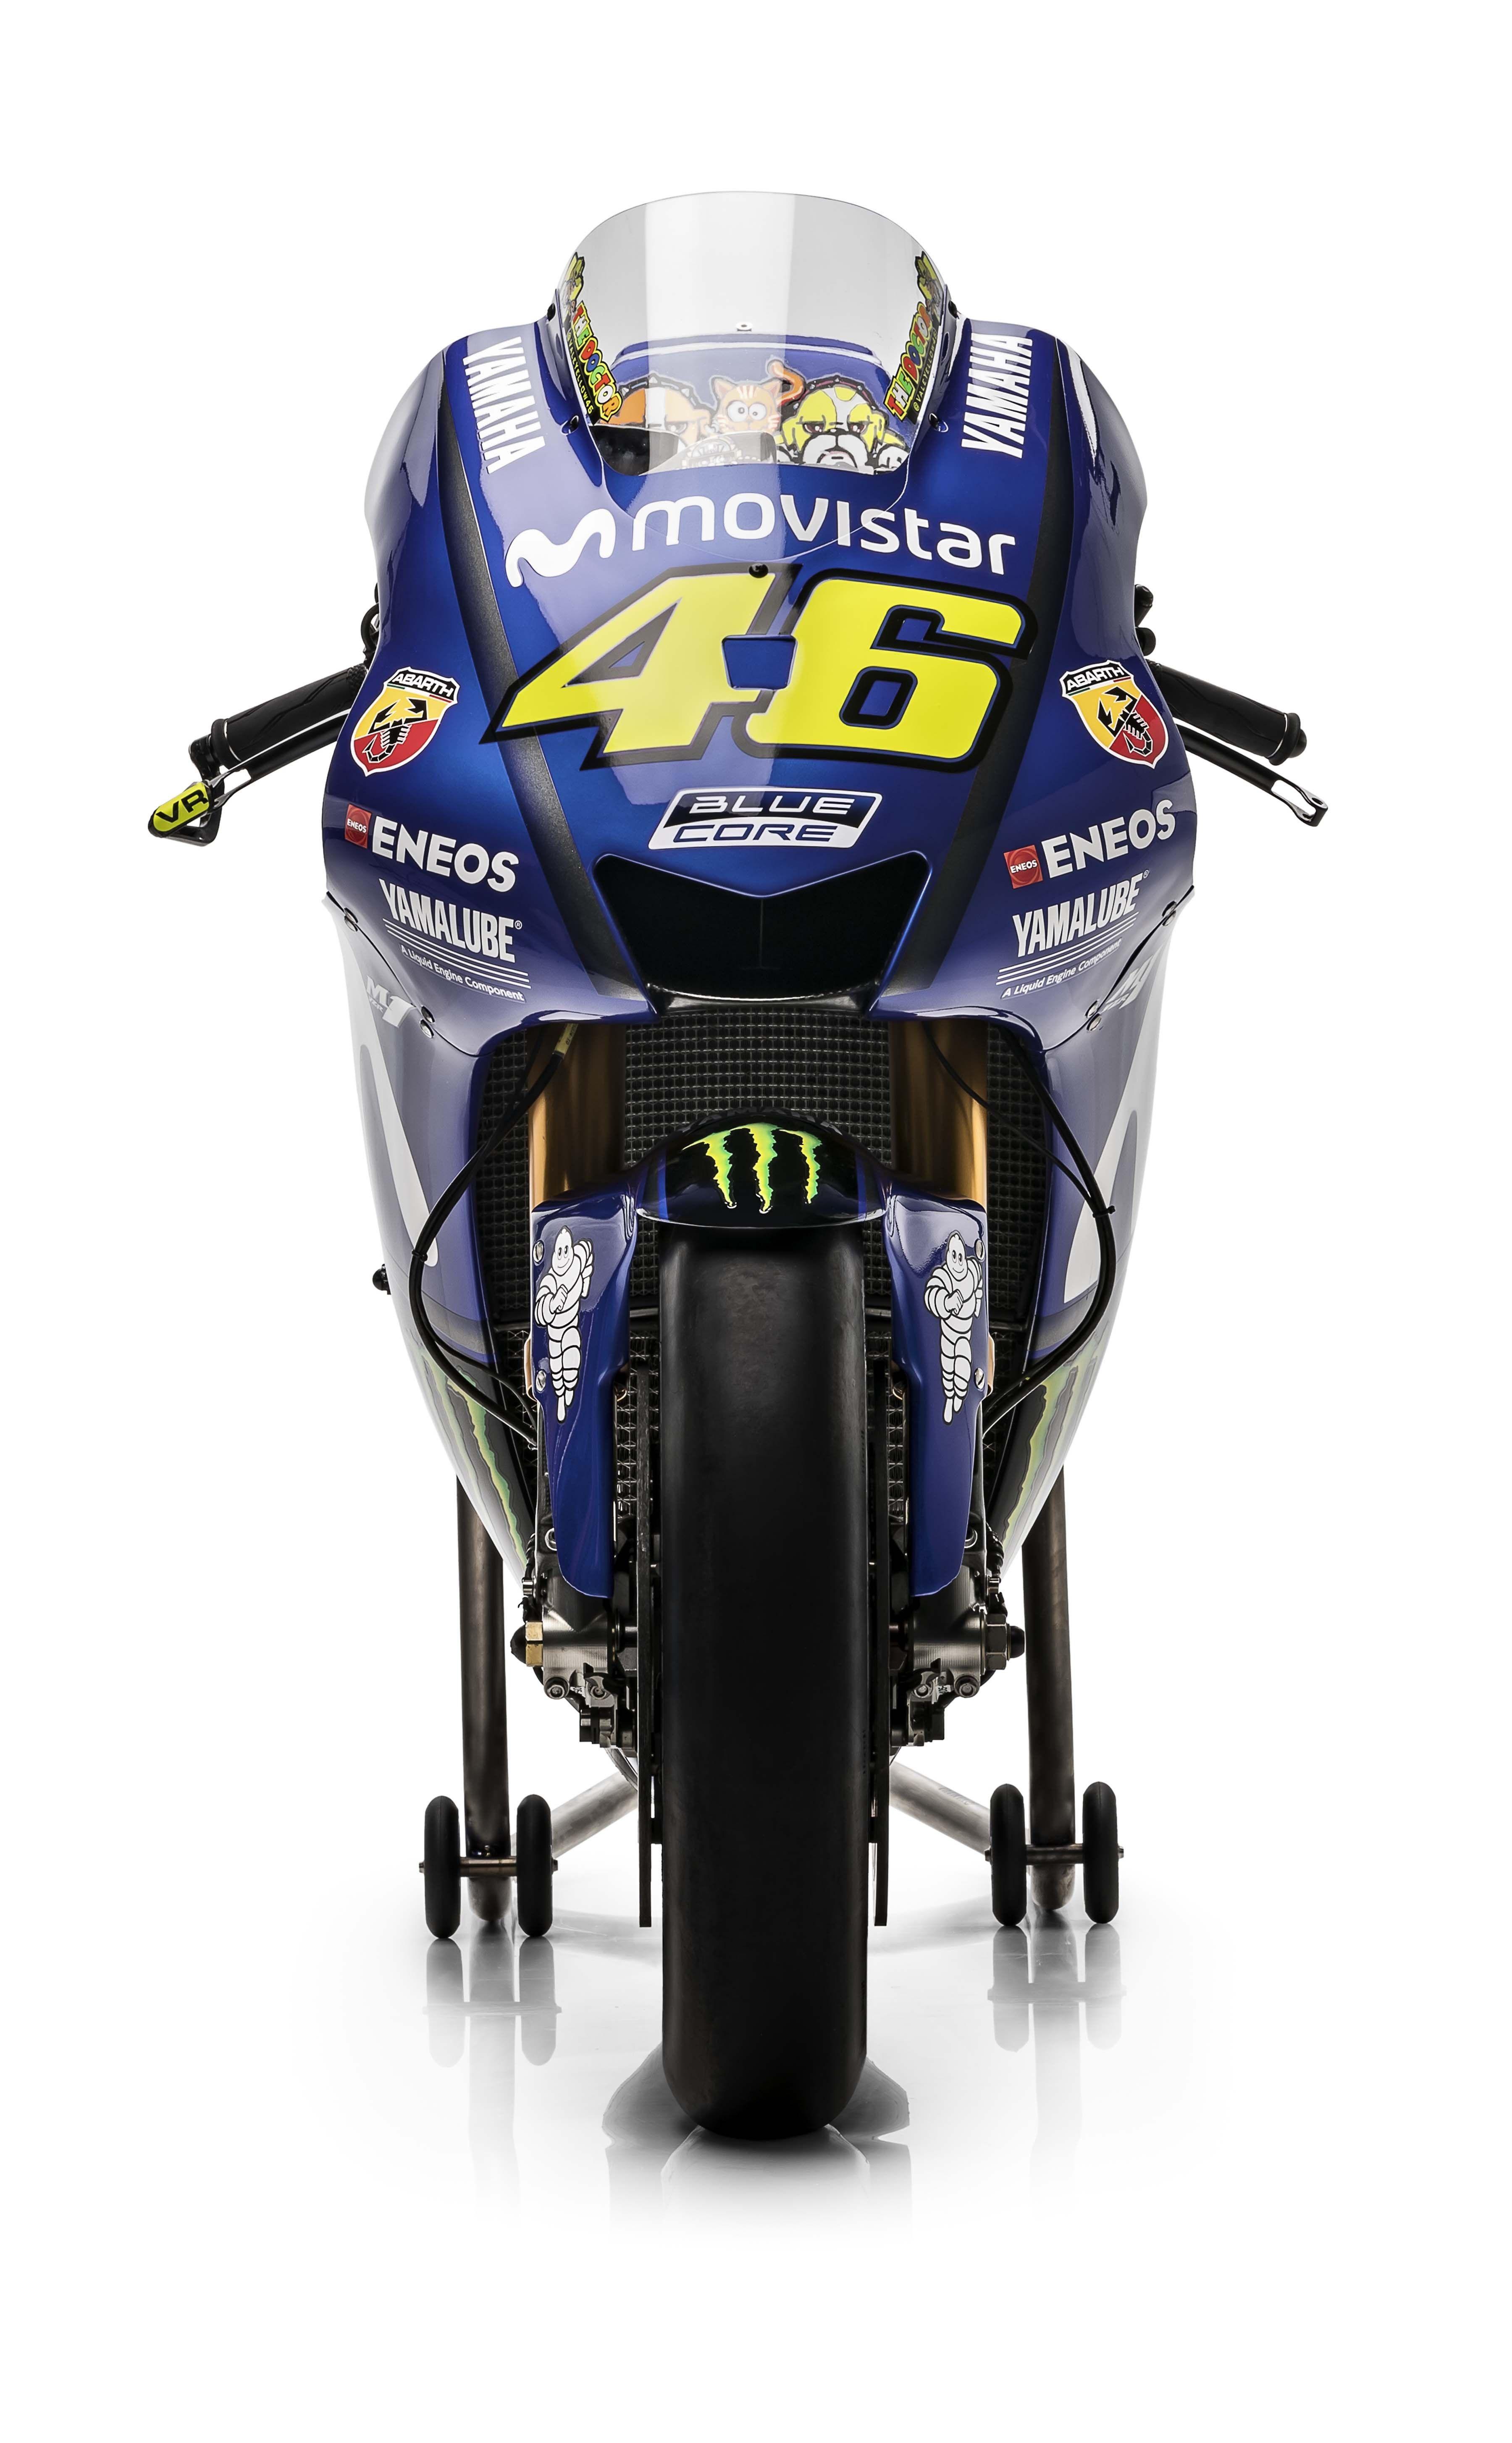 Yamaha Yzr M1 Archives & Rubber